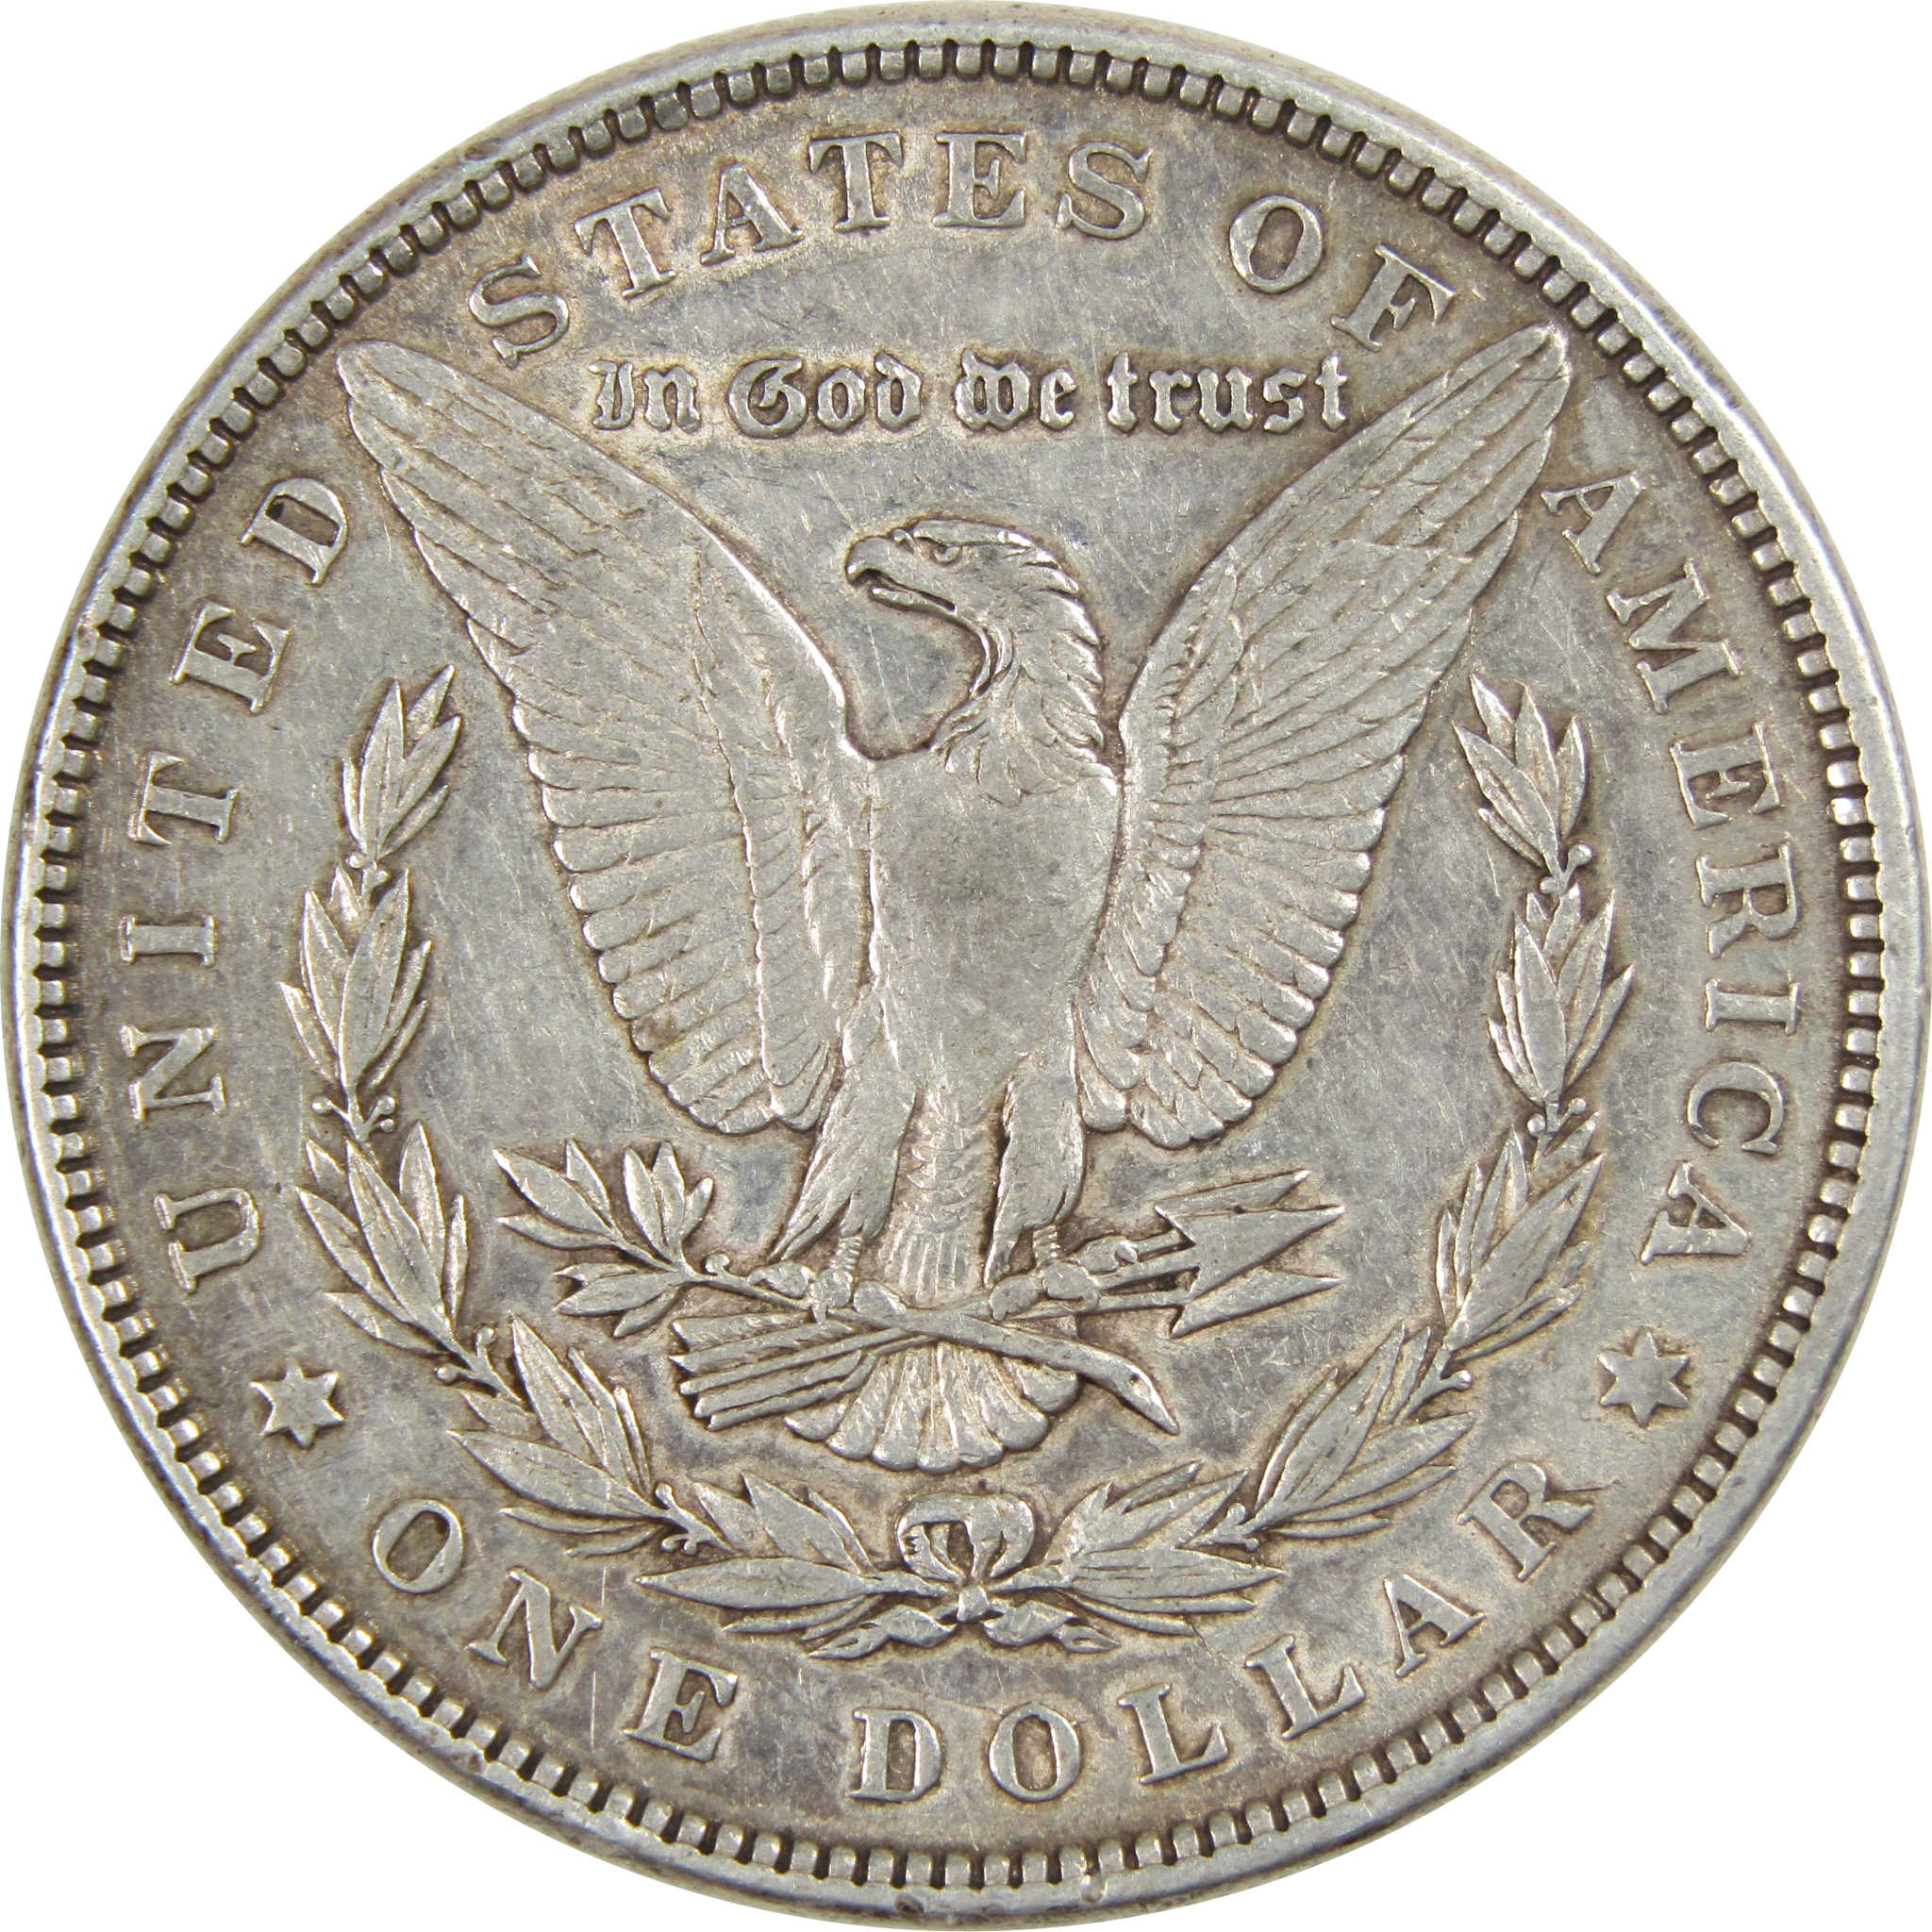 1884 Morgan Dollar XF EF Extremely Fine 90% Silver Coin SKU:I3819 - Morgan coin - Morgan silver dollar - Morgan silver dollar for sale - Profile Coins &amp; Collectibles